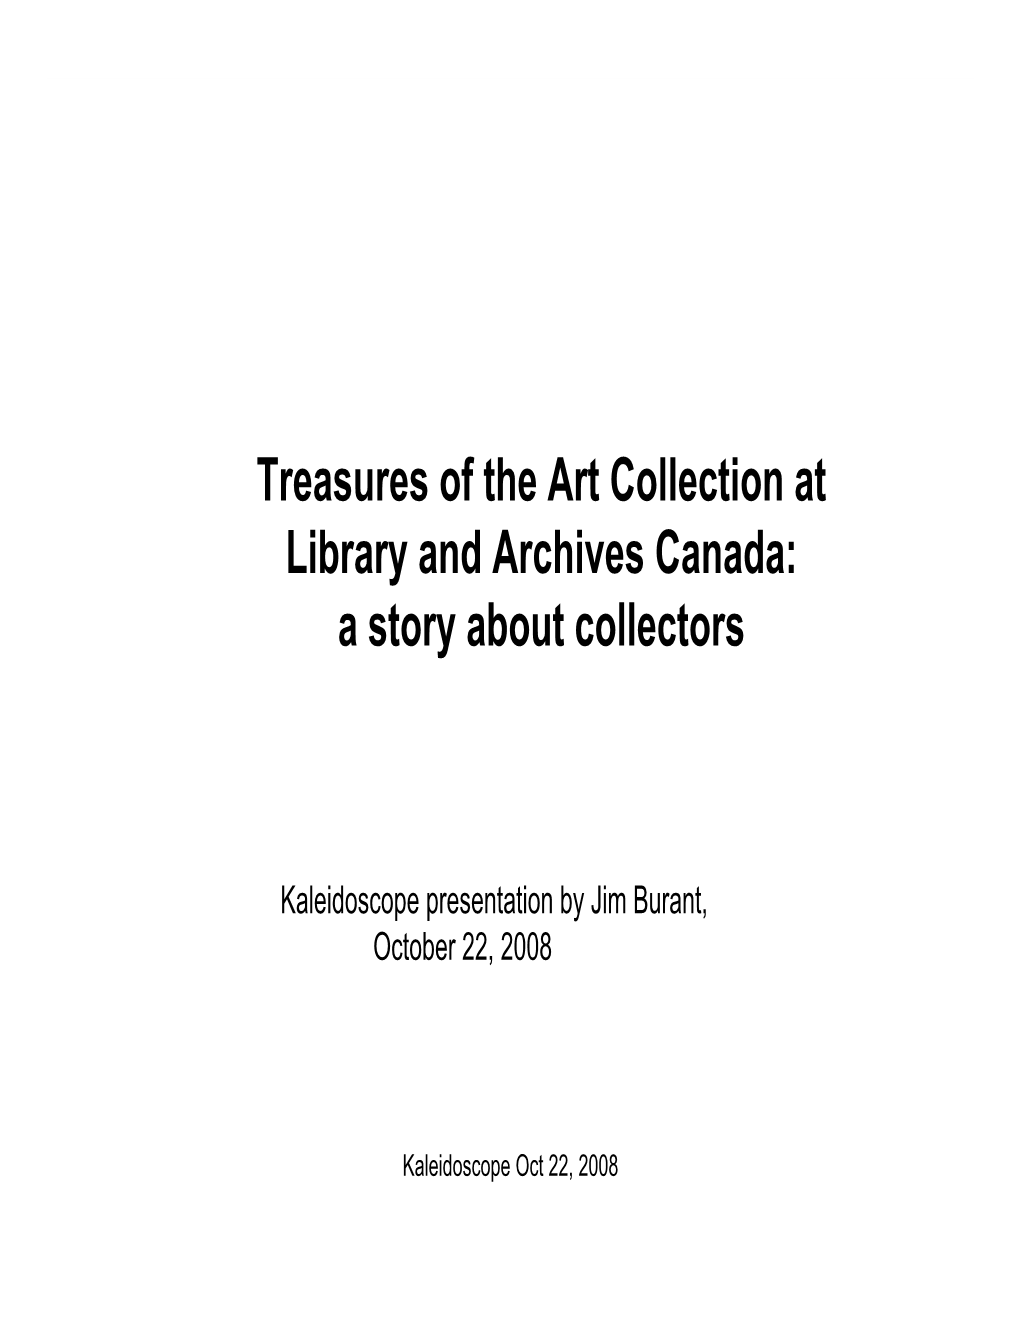 Treasures of the Art Collection at Library and Archives Canada: a Story About Collectors